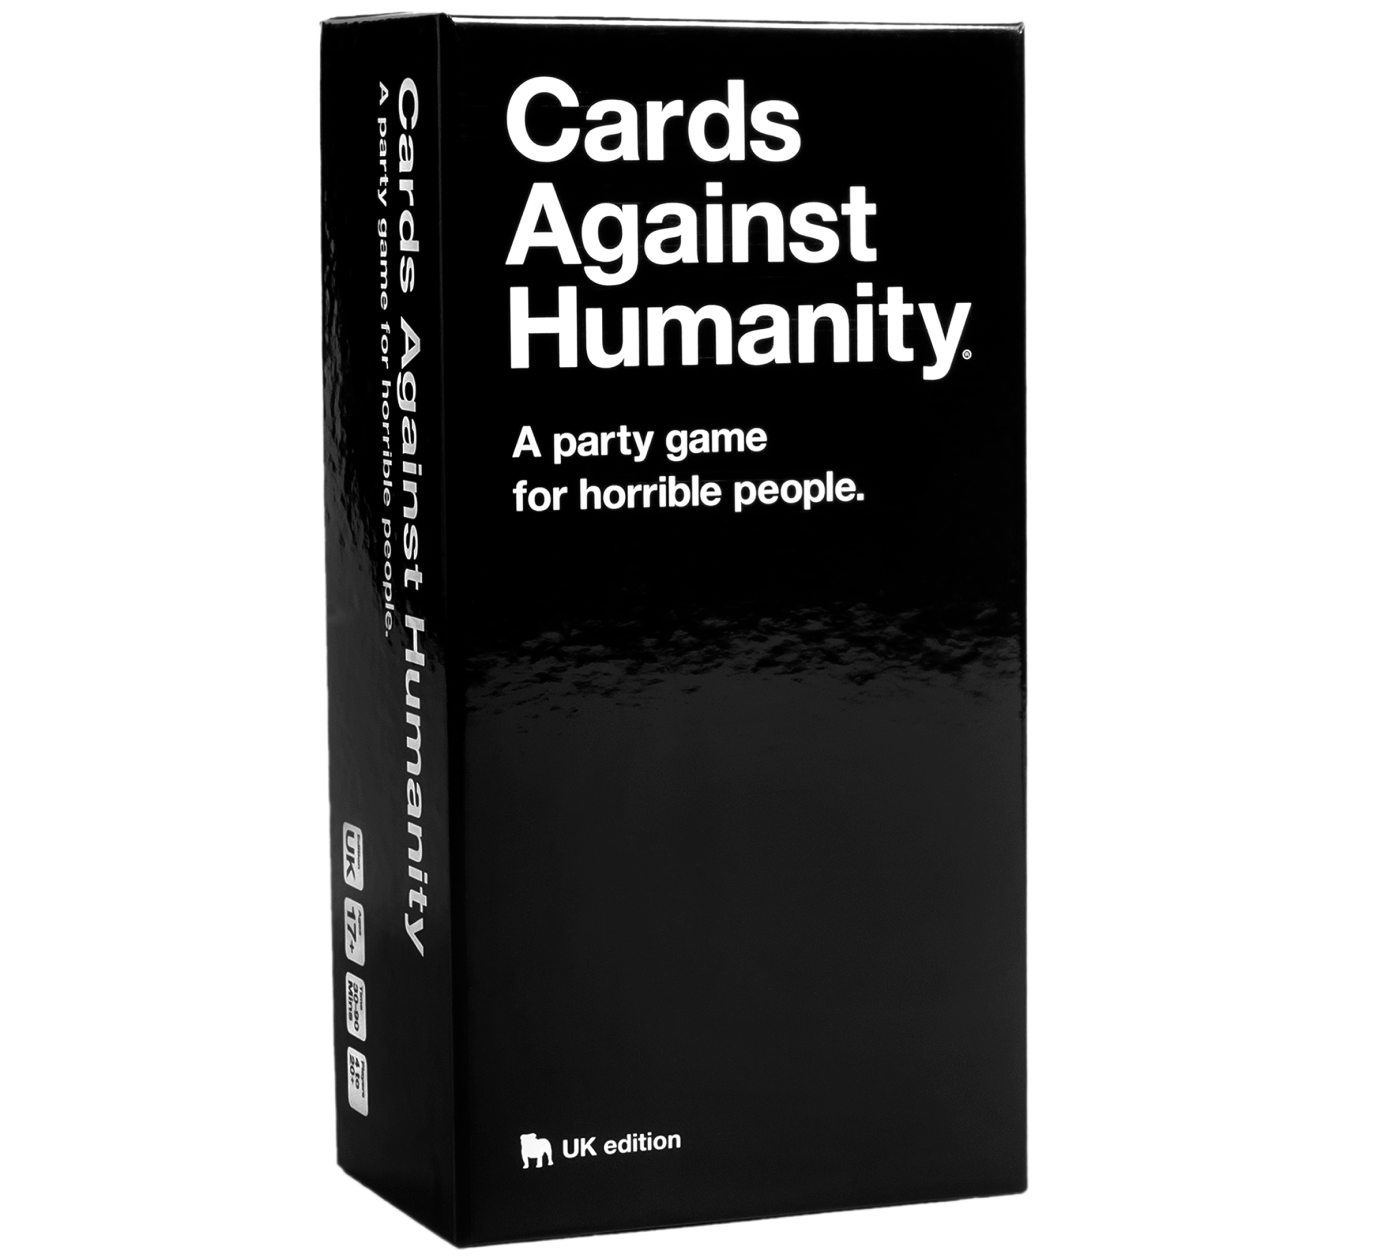 New Sealed Original Expansion Pack! 2014 Holiday Pack Cards Against Humanity 